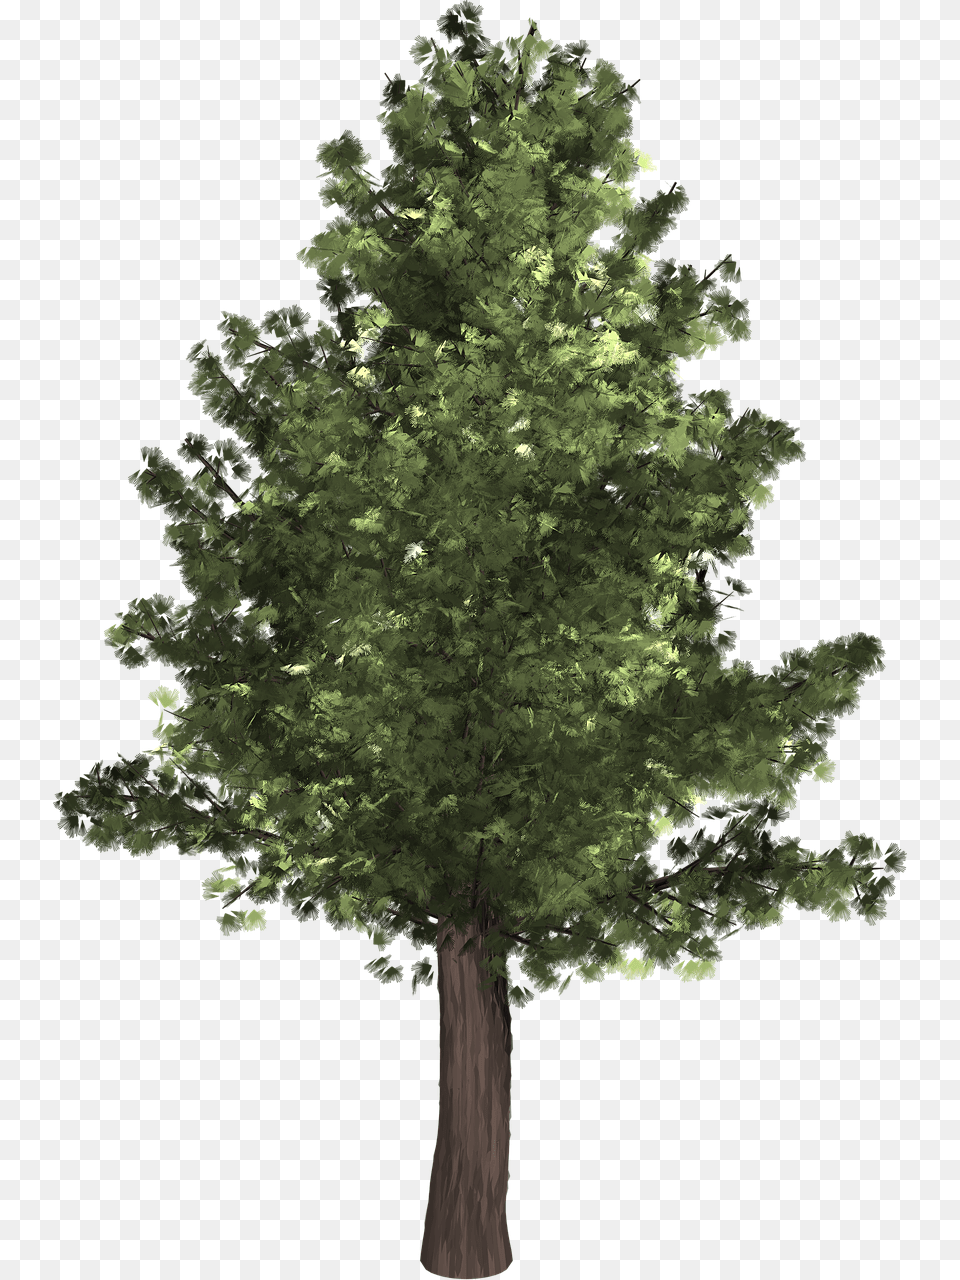 Oak Tree High Quality, Plant, Tree Trunk, Conifer, Sycamore Free Png Download